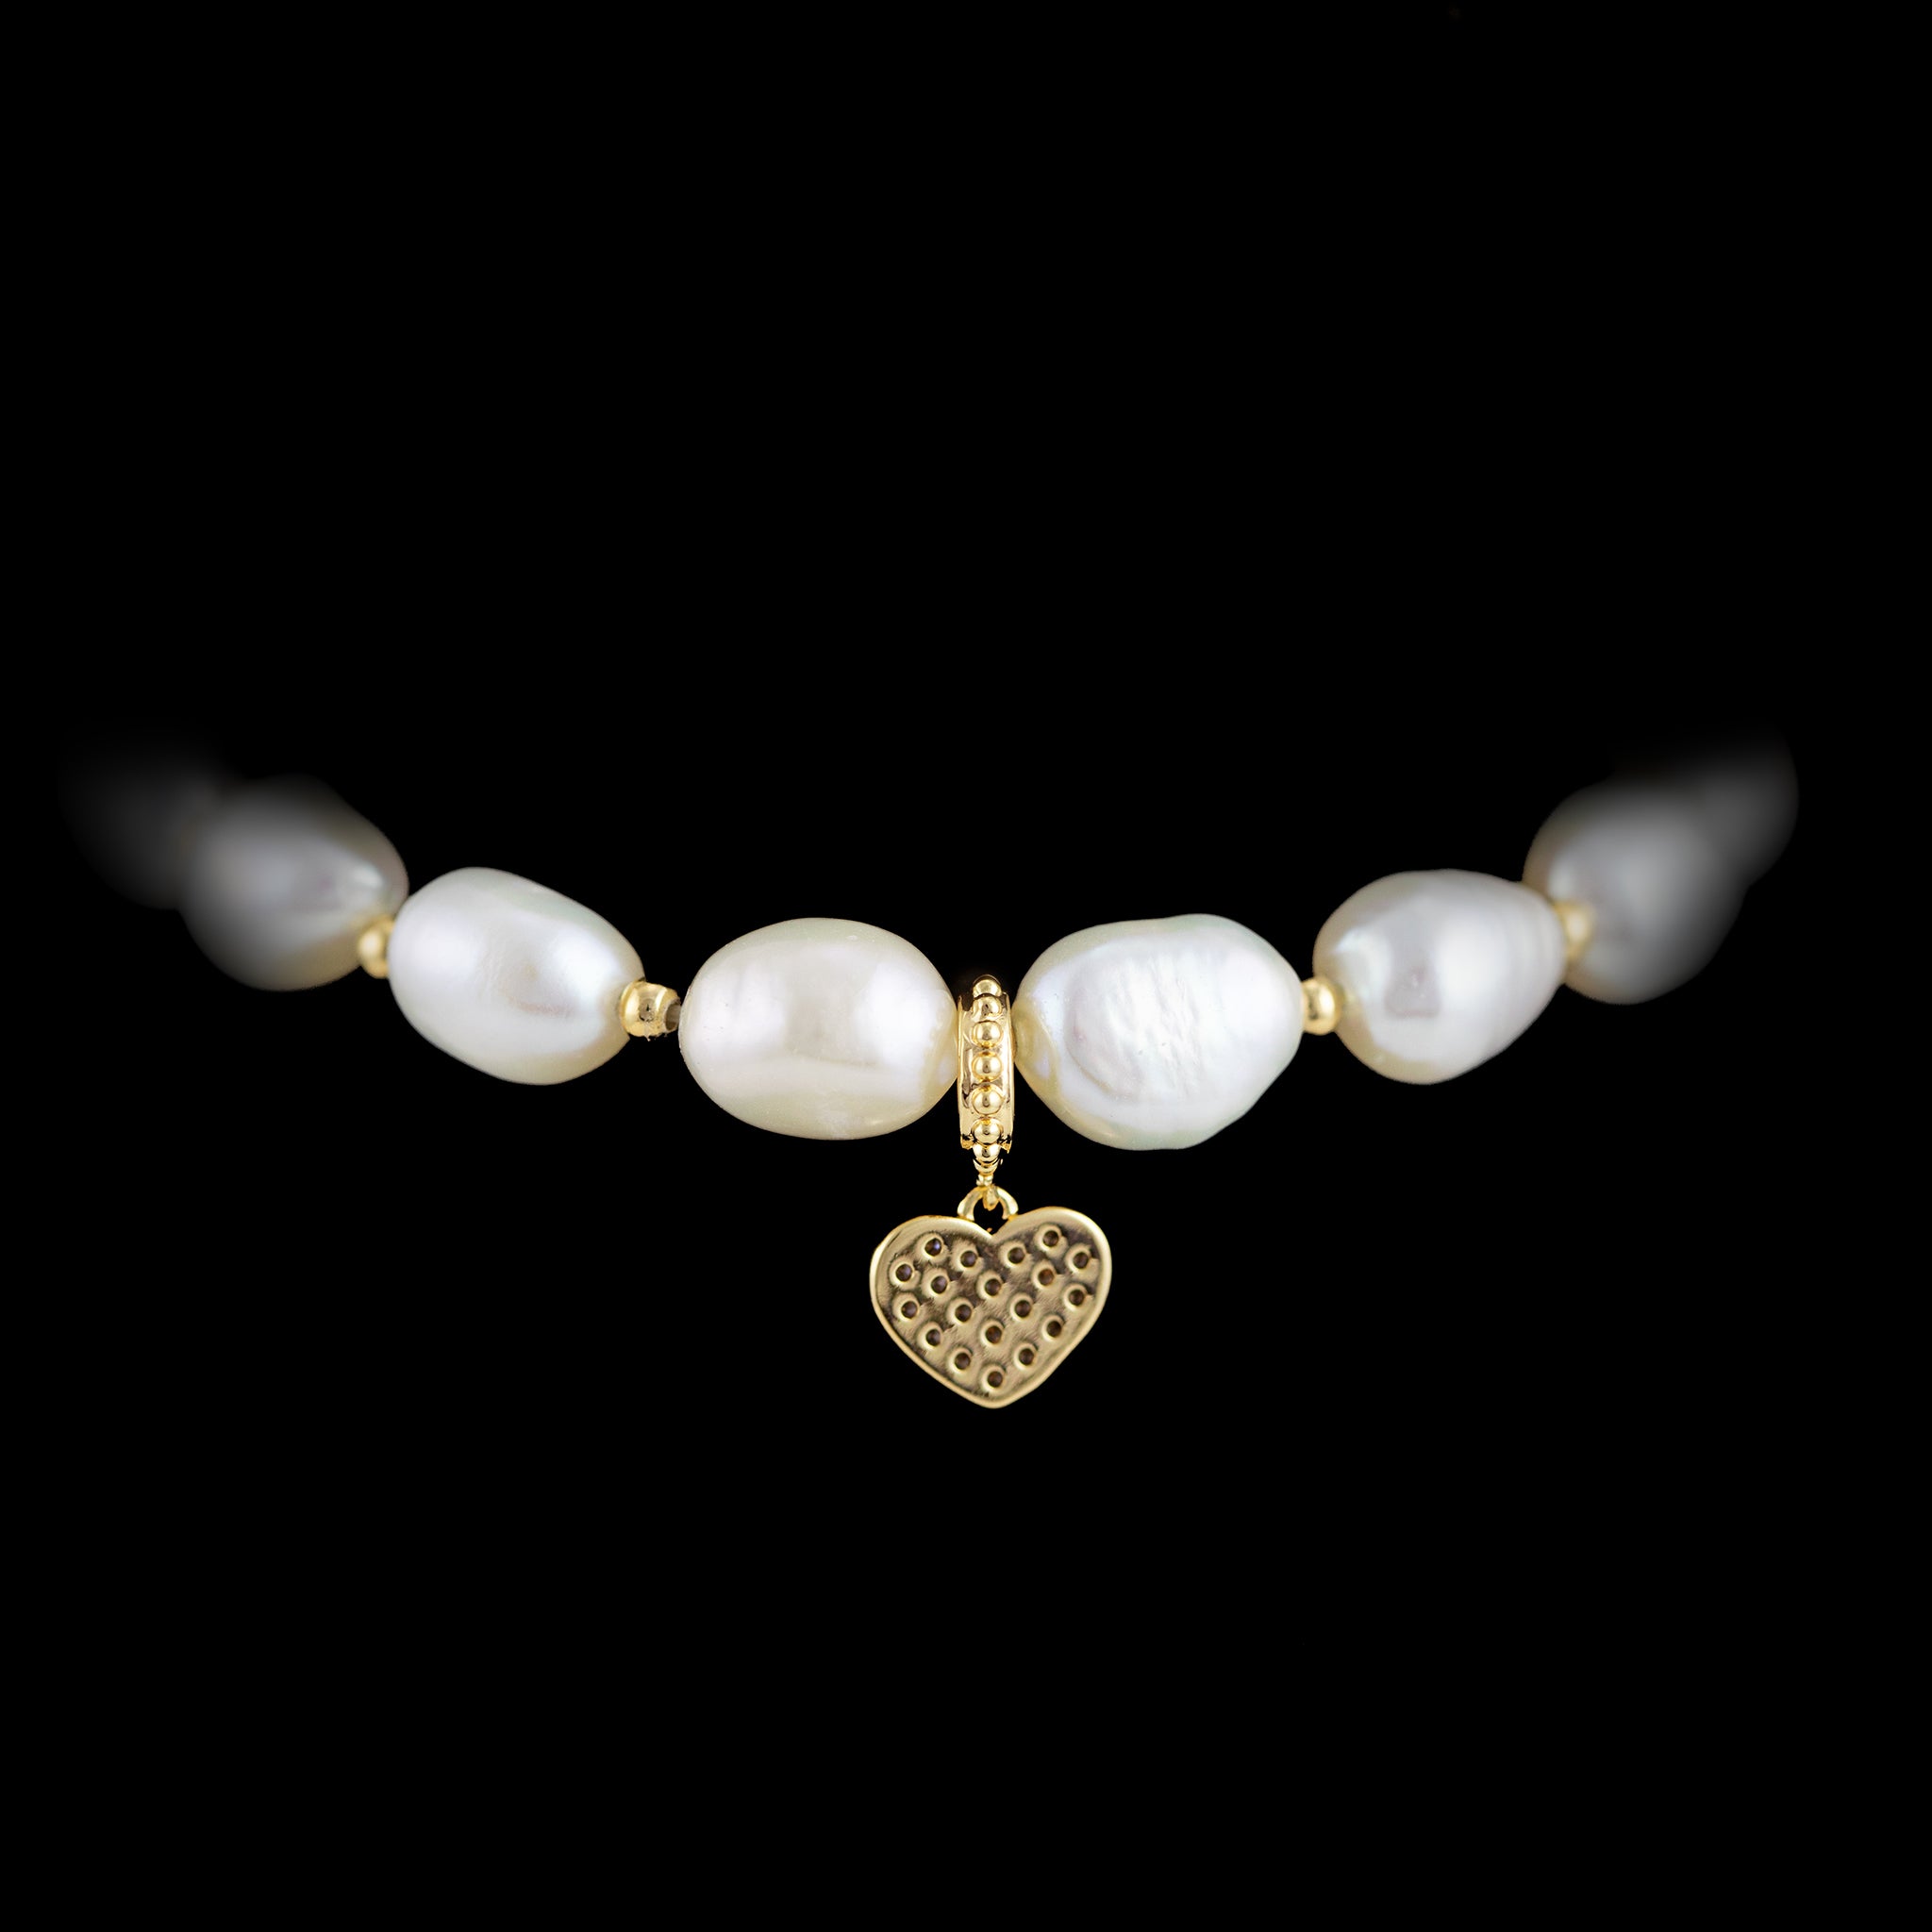 Freshwater Pearl Bracelet With Baroque 14K Gold Charm - L'Amour Pearls